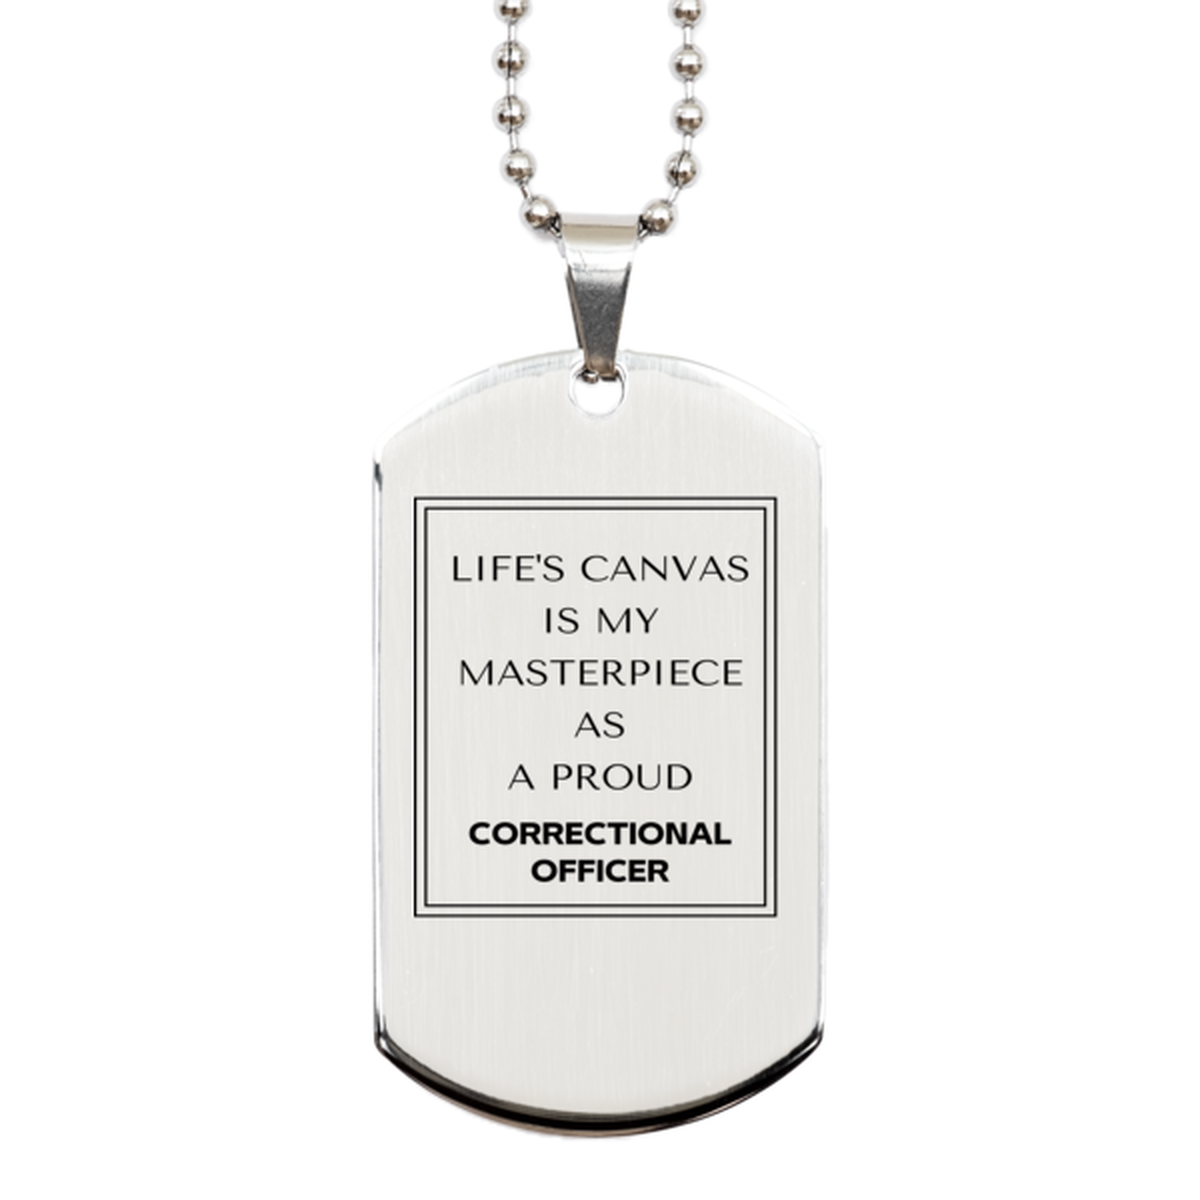 Proud Correctional Officer Gifts, Life's canvas is my masterpiece, Epic Birthday Christmas Unique Silver Dog Tag For Correctional Officer, Coworkers, Men, Women, Friends